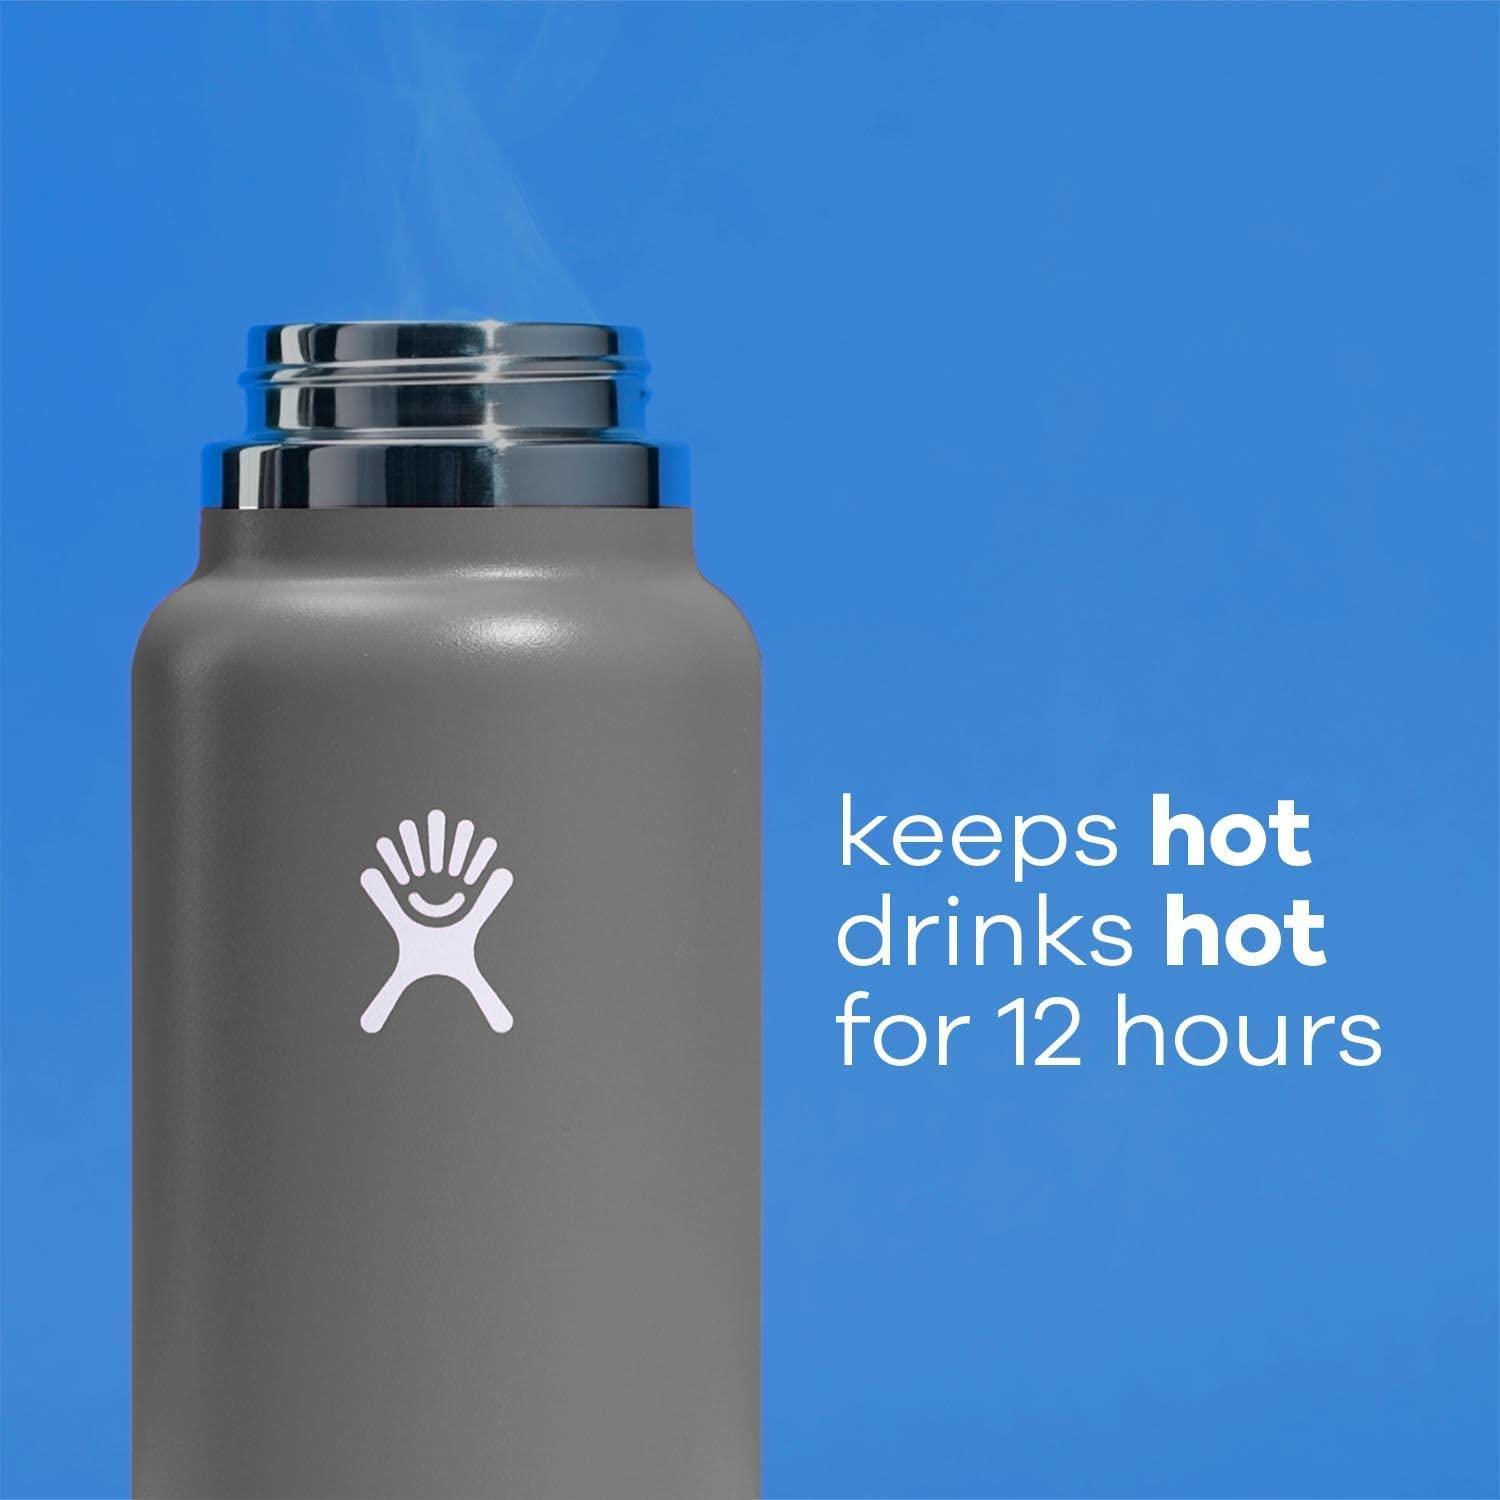 Hydro Flask: 'Baby, it's cold inside', Features